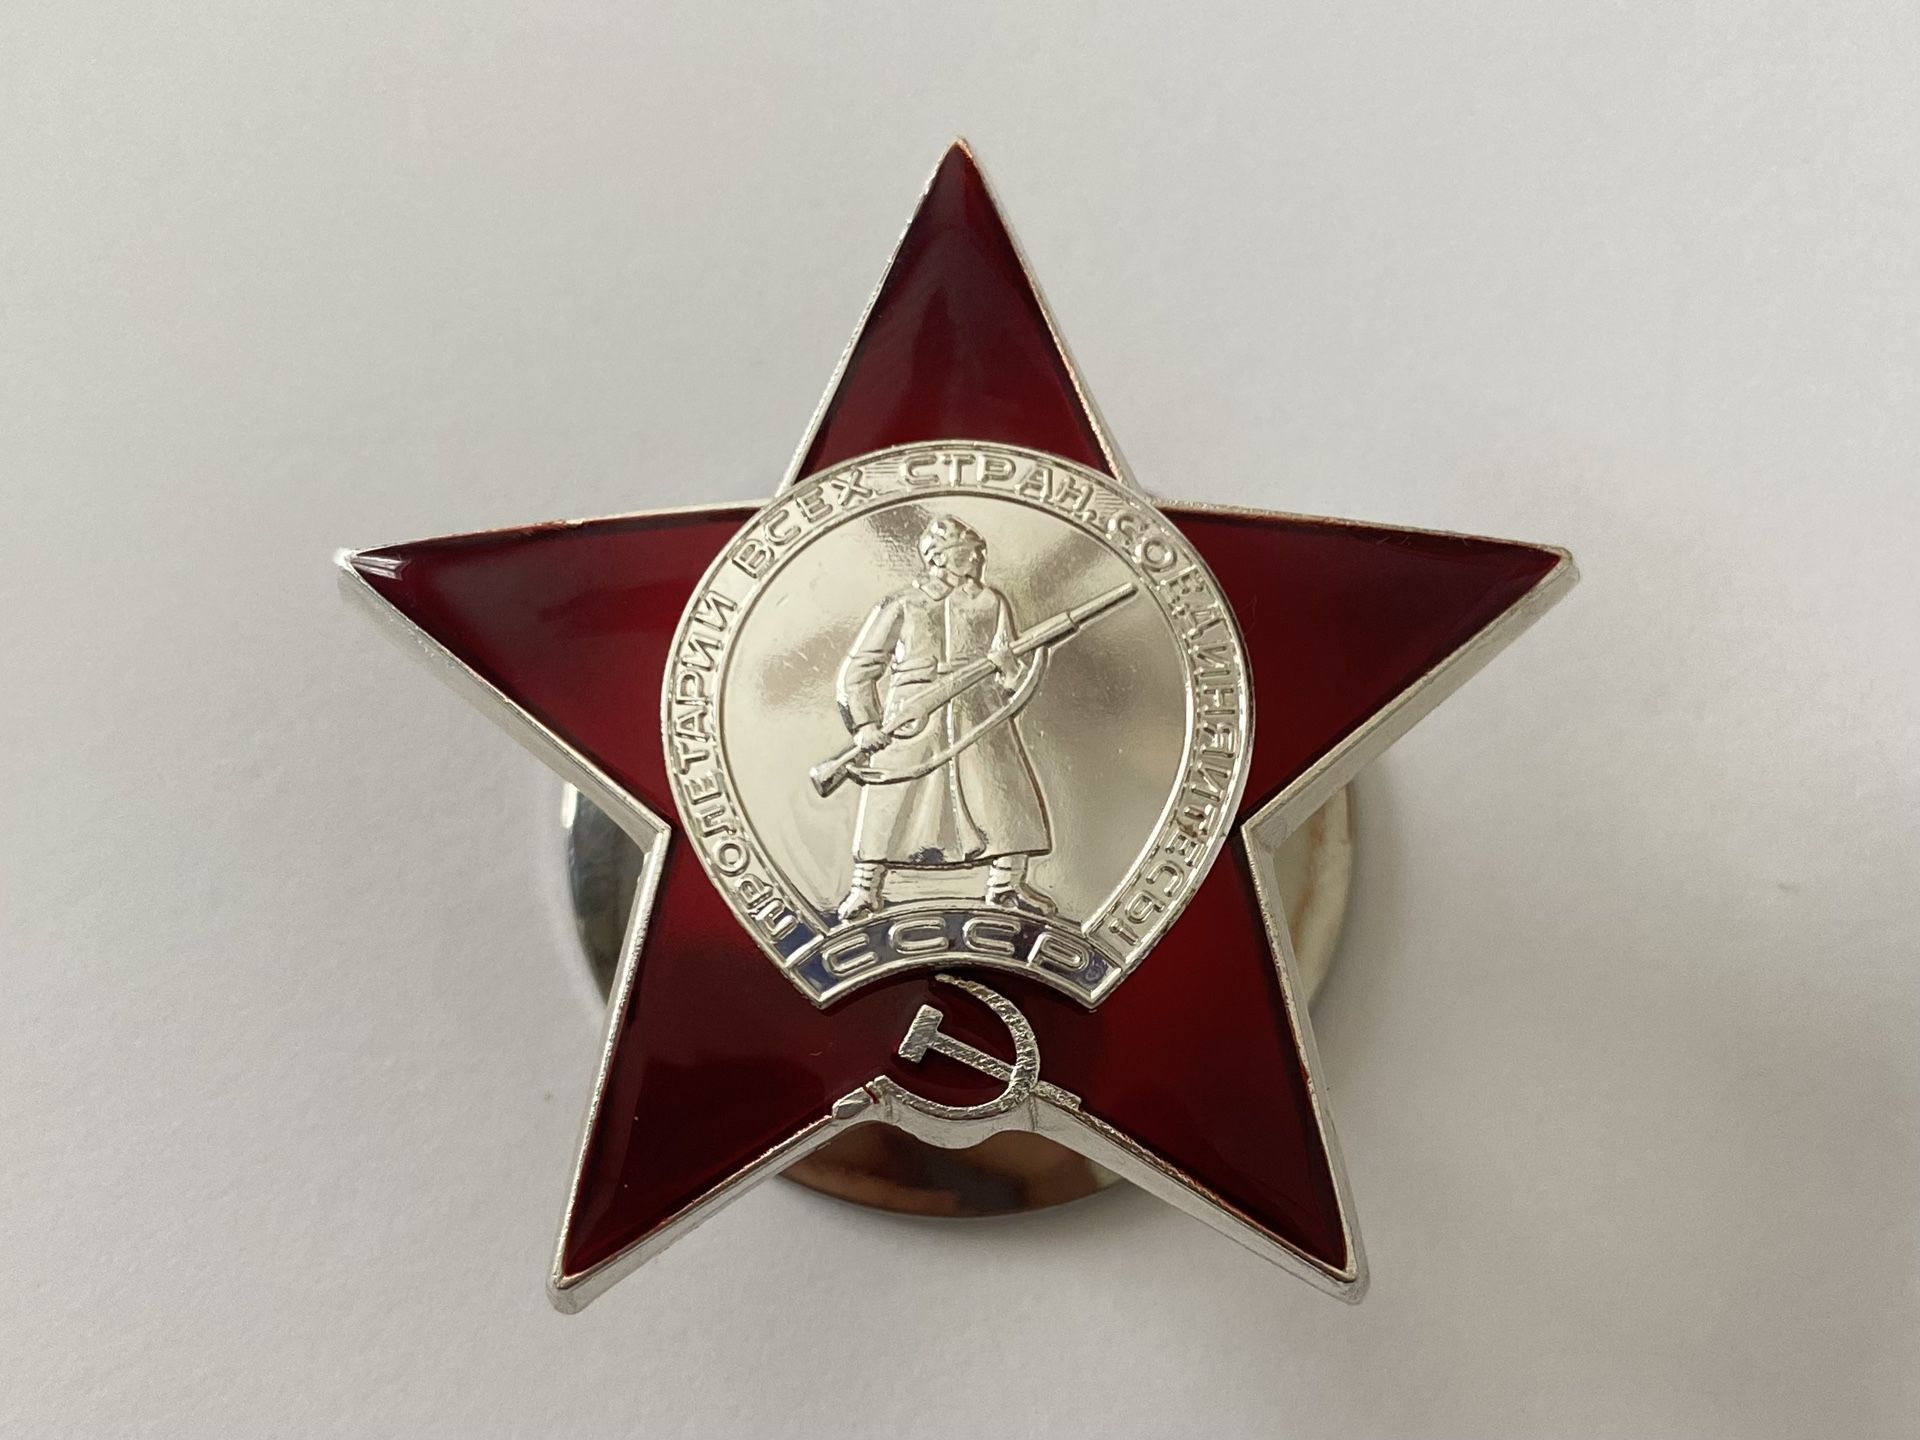 USSR Order “Red Star” of the Soviet Union , Ussr , Red scare , WWII. Copy